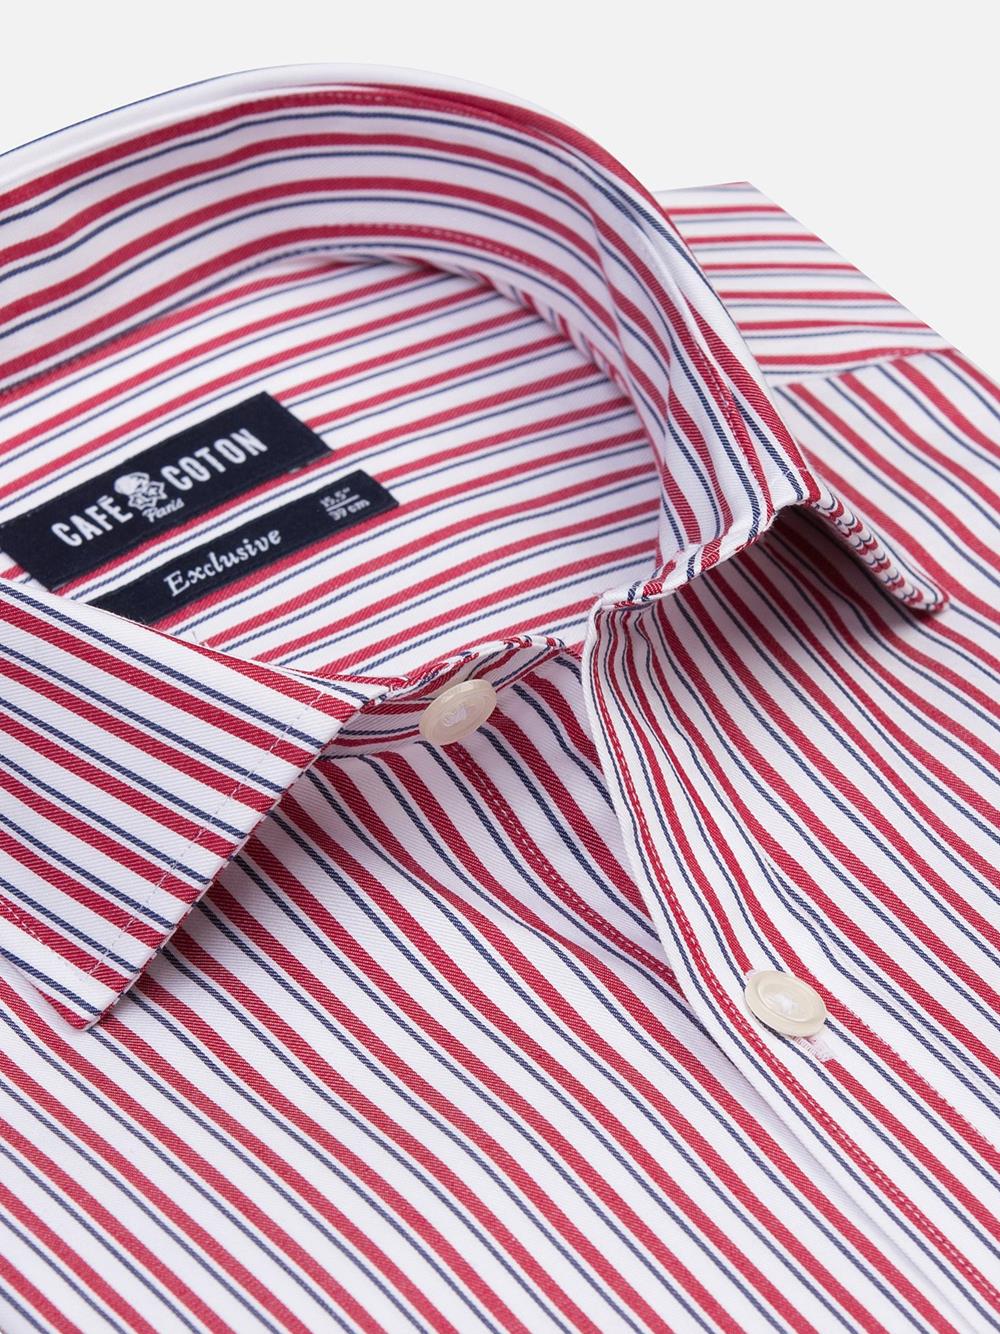 Stanley navy blue striped slim fit shirt - Extra long sleeves